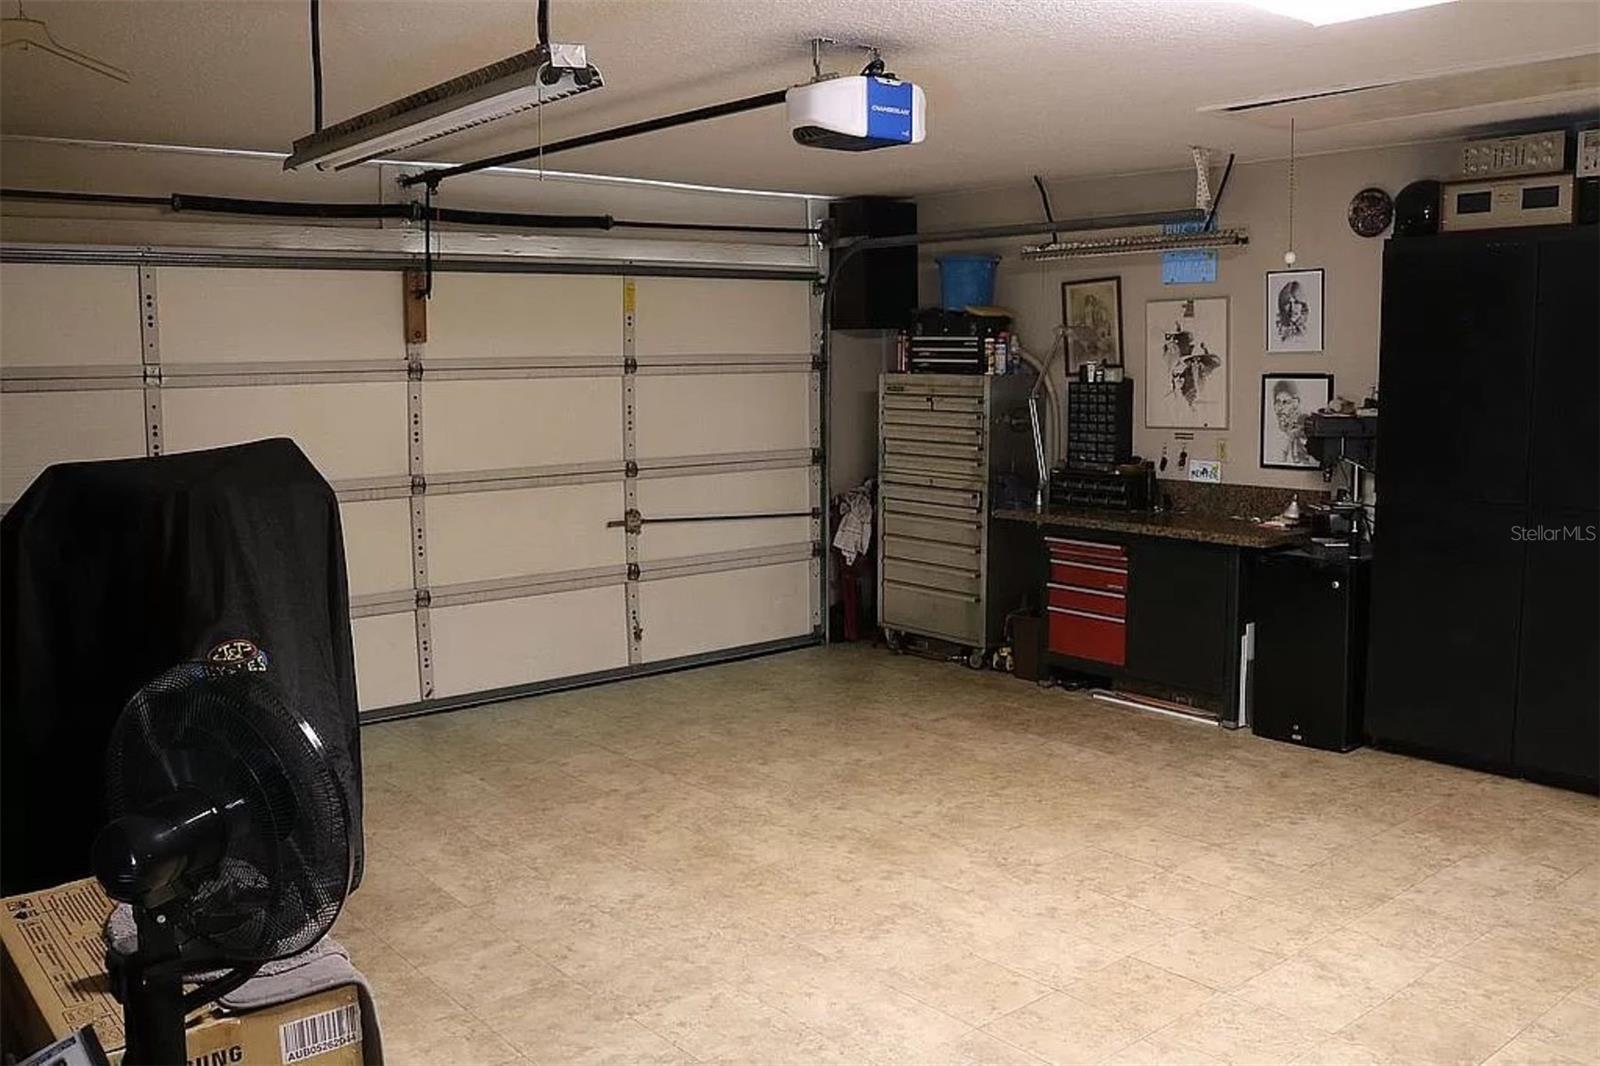 Another garage view